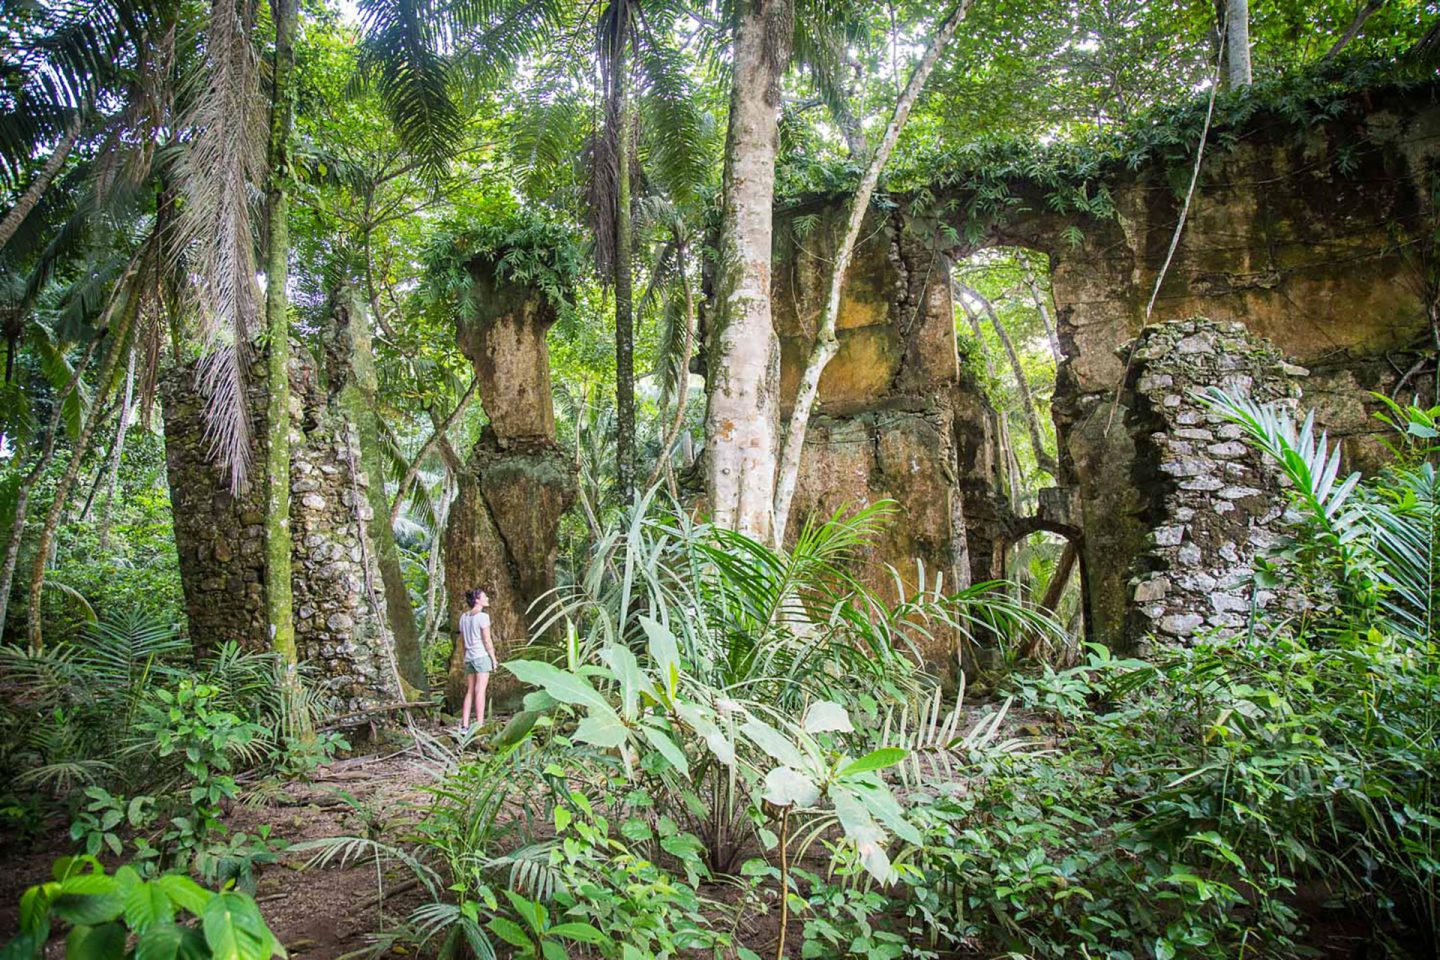 Discover the abandoned ruins of Príncipe, which are so overgrown by vegetation they have become part of the forest. 